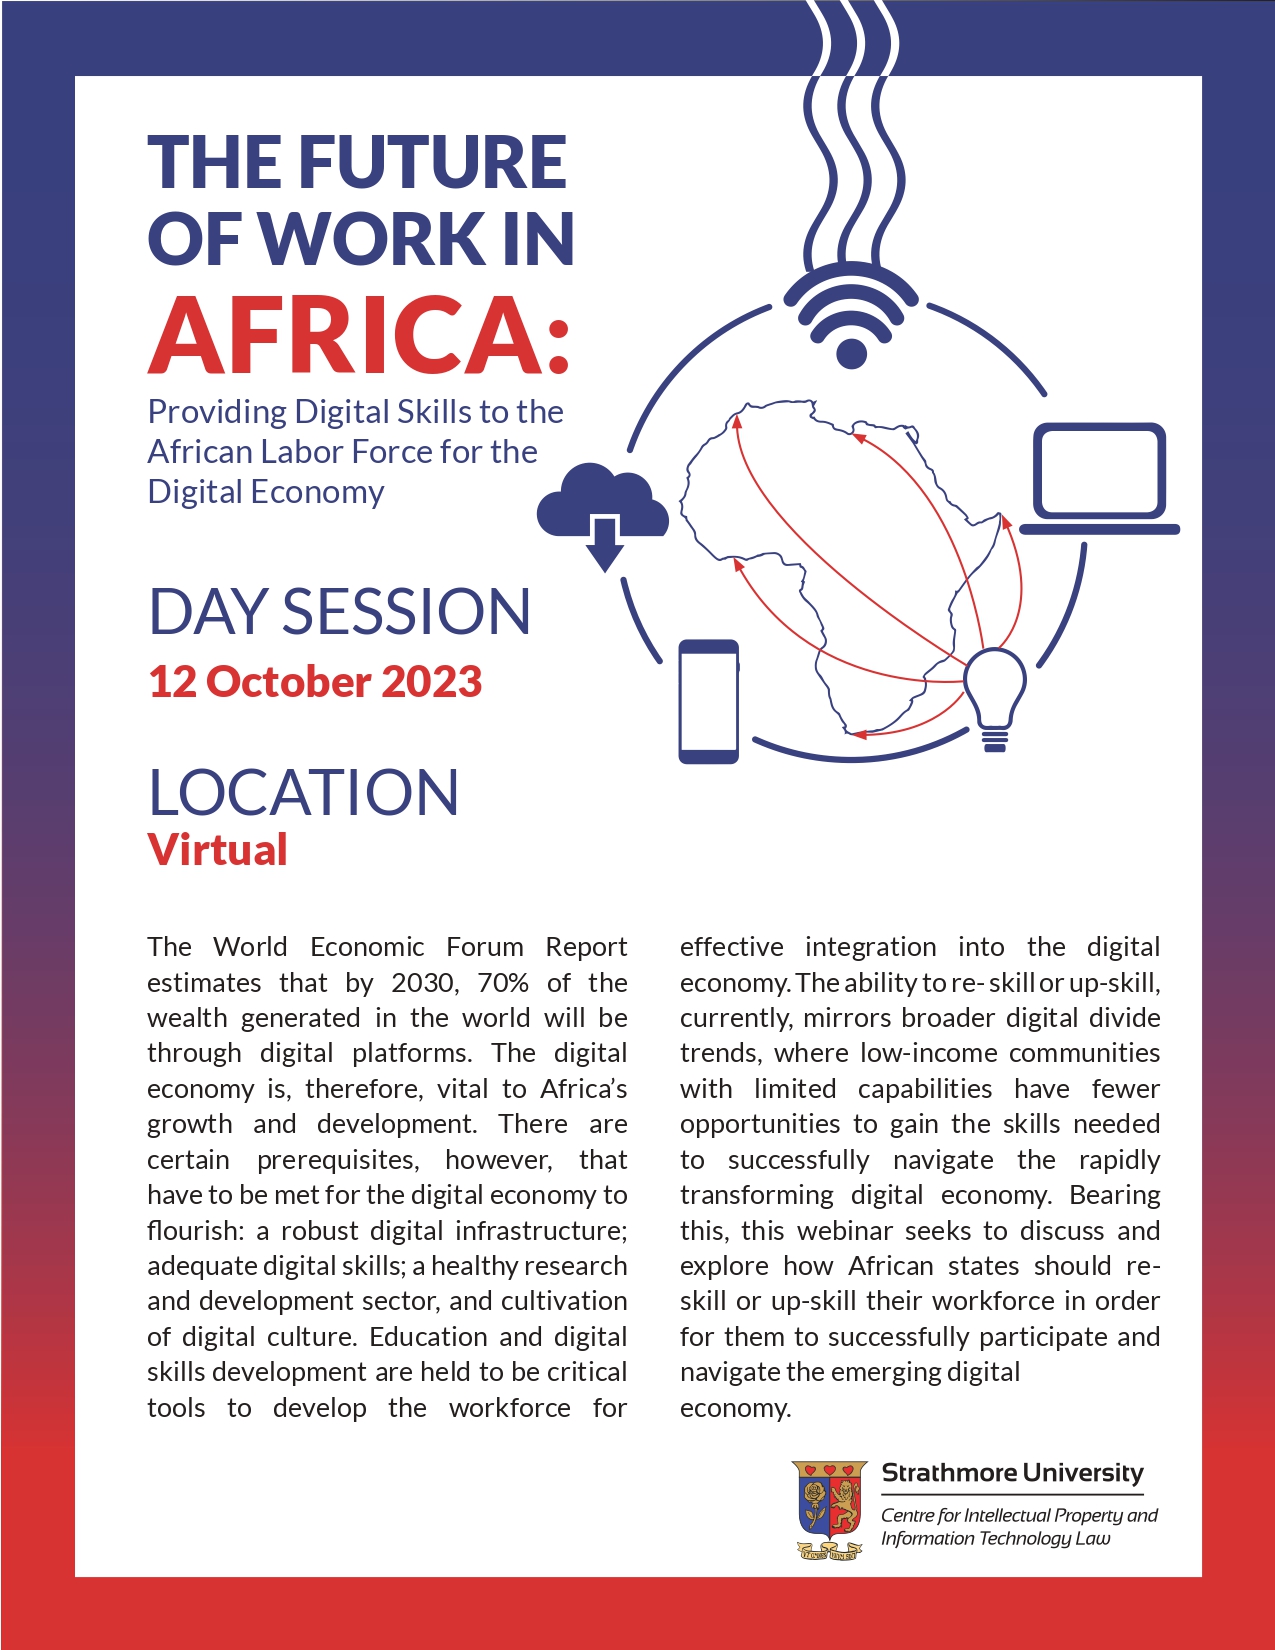 The Future of Work in Africa: Providing Digital Skills to the African Labor Force for the Digital Economy